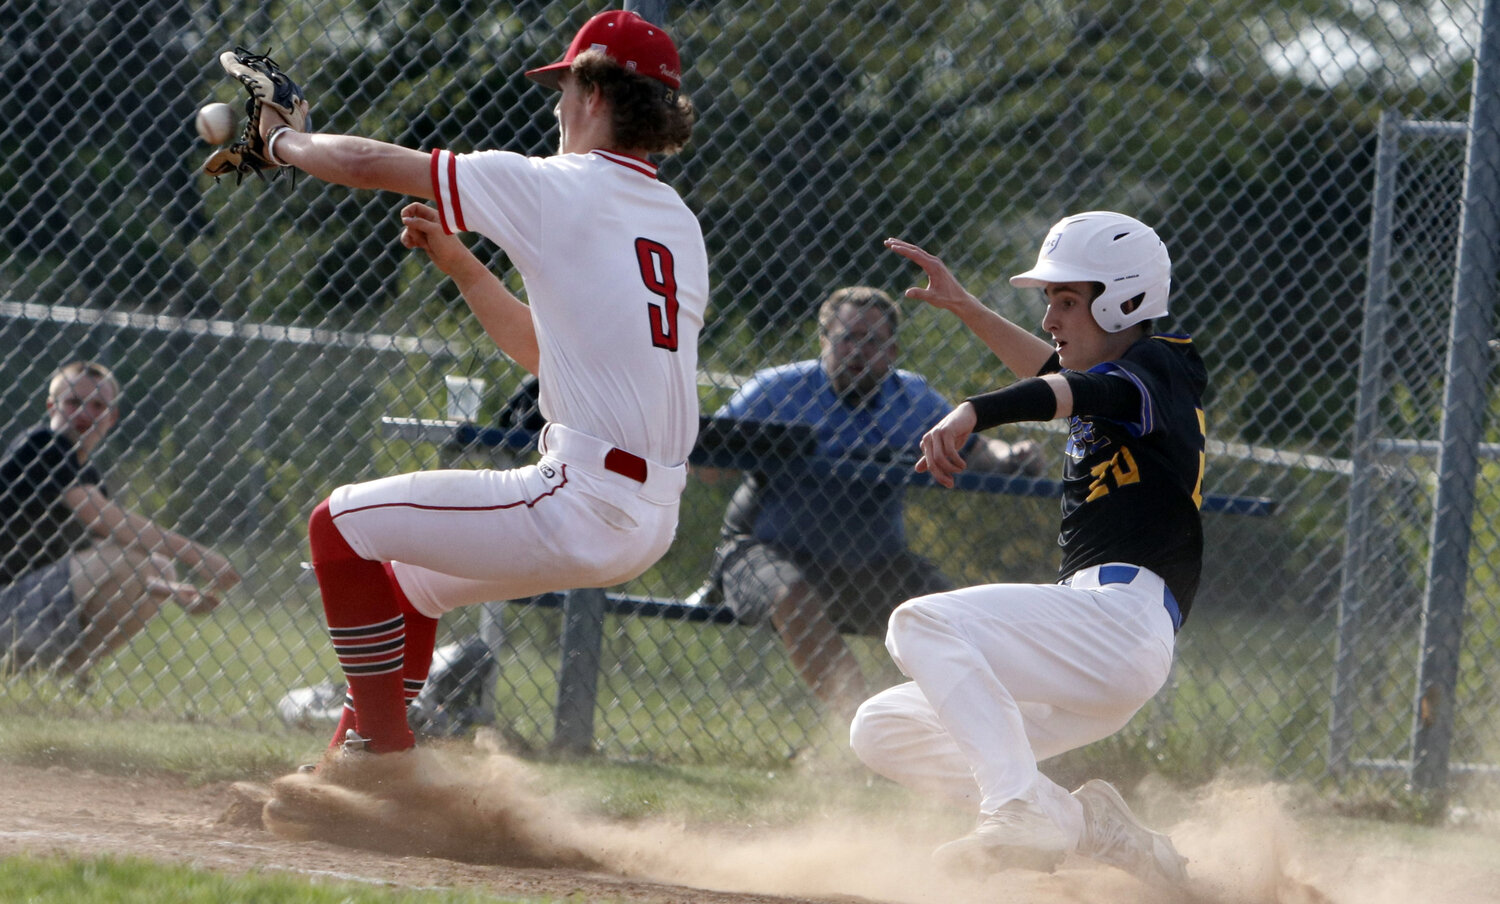 Wright City's Micah Boeckman slides towards home plate during last week's game against Elsberry. Boeckman was ruled safe on the play.